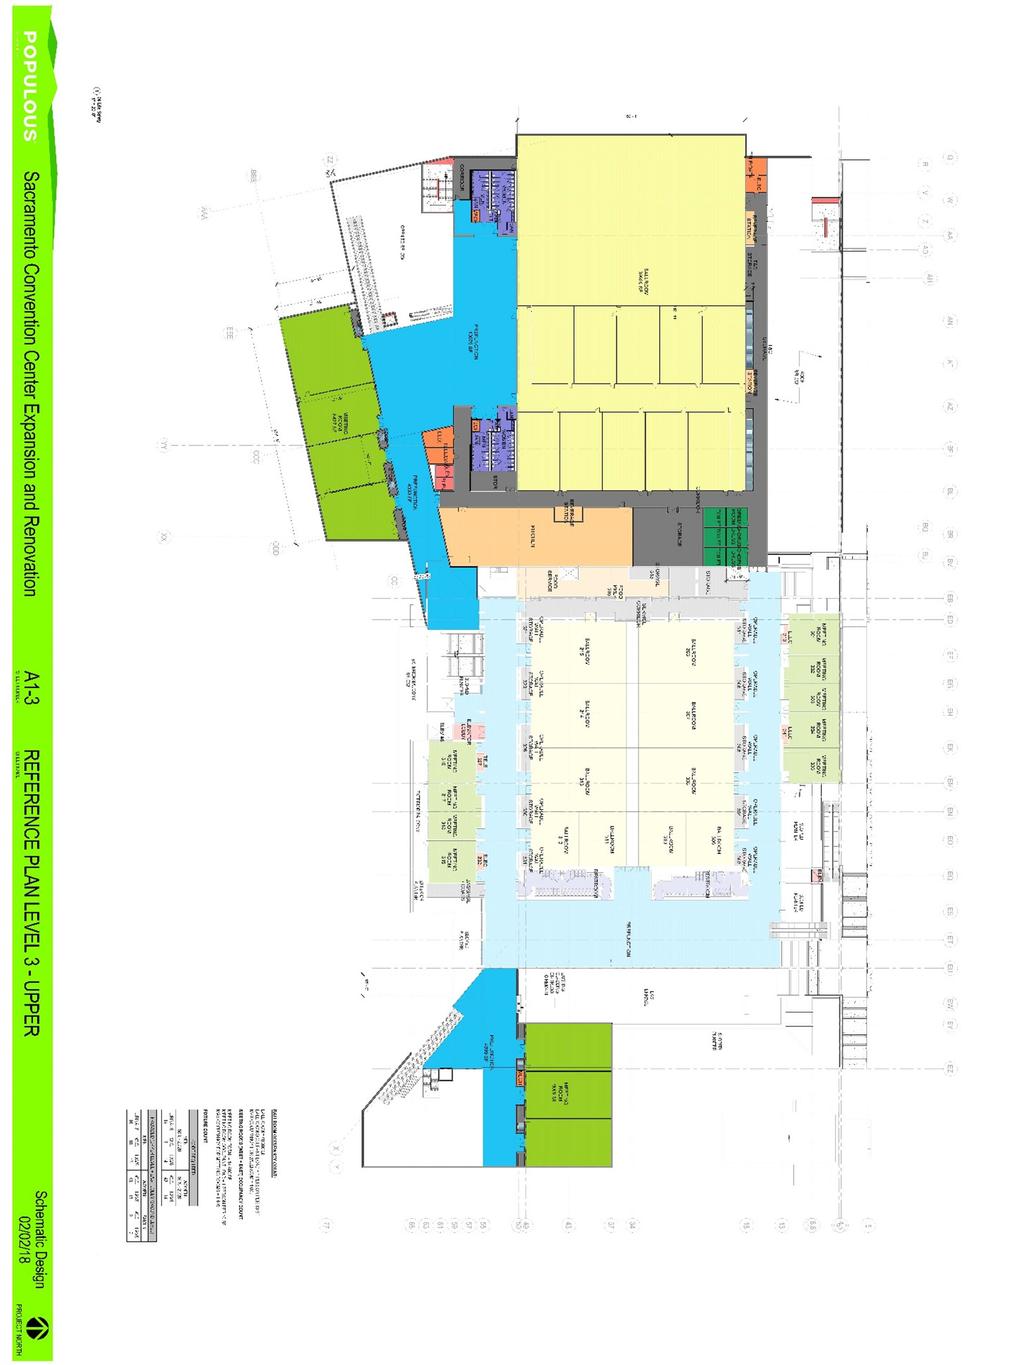 Figure 11 Convention Center Floor Plan (Upper Level) Legend: New Lobby Areas Existing Lobby